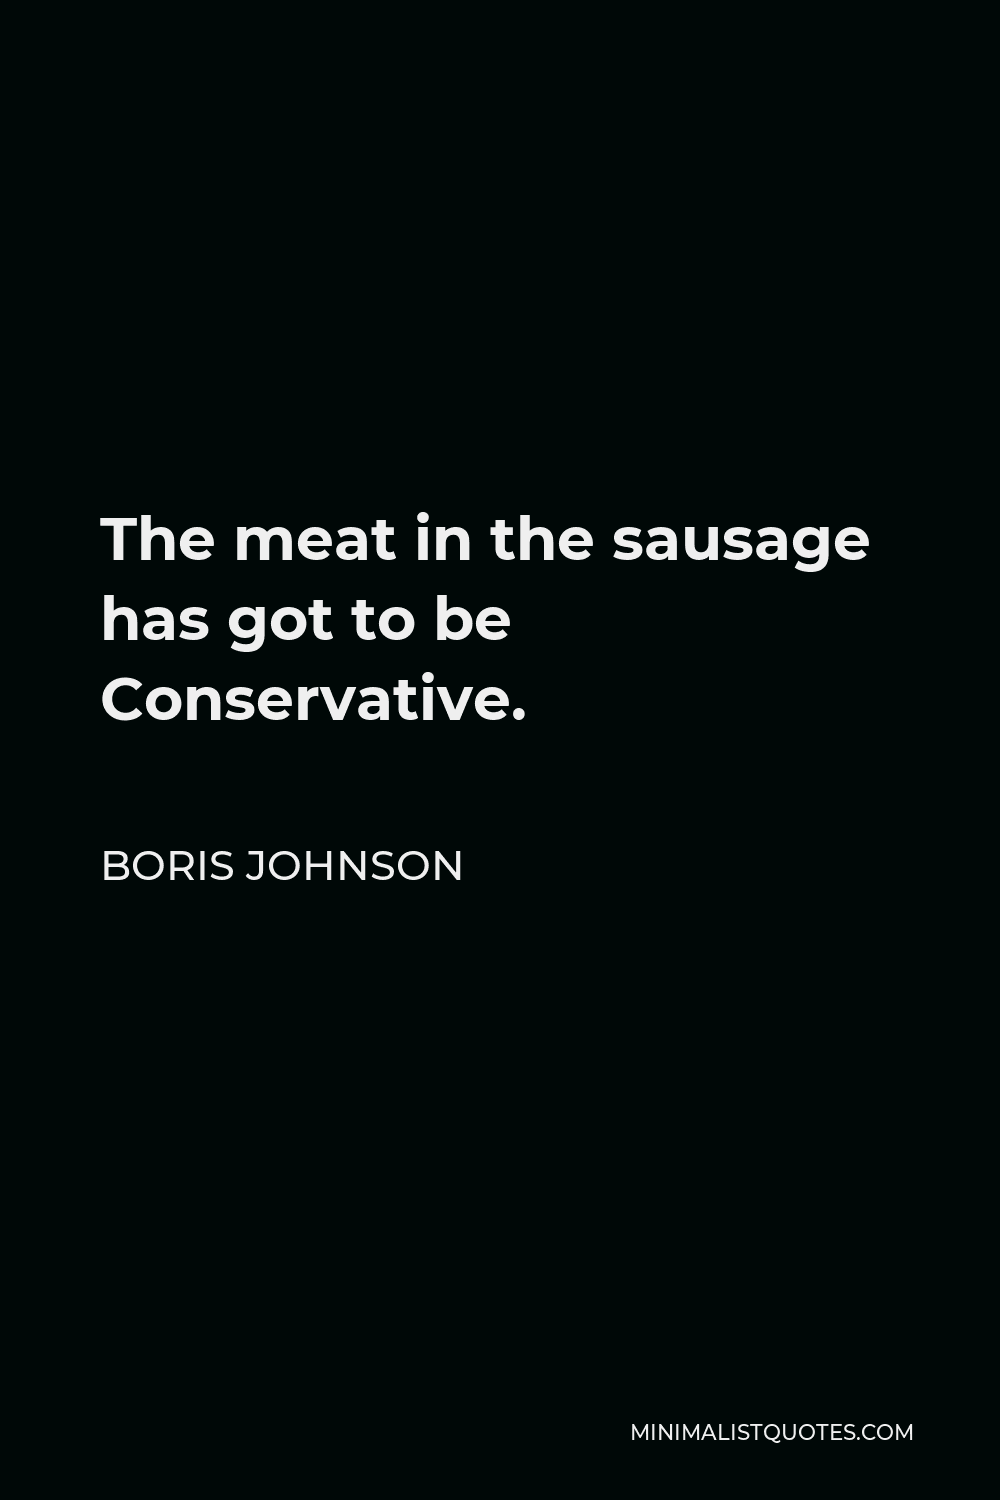 Boris Johnson Quote - The meat in the sausage has got to be Conservative.